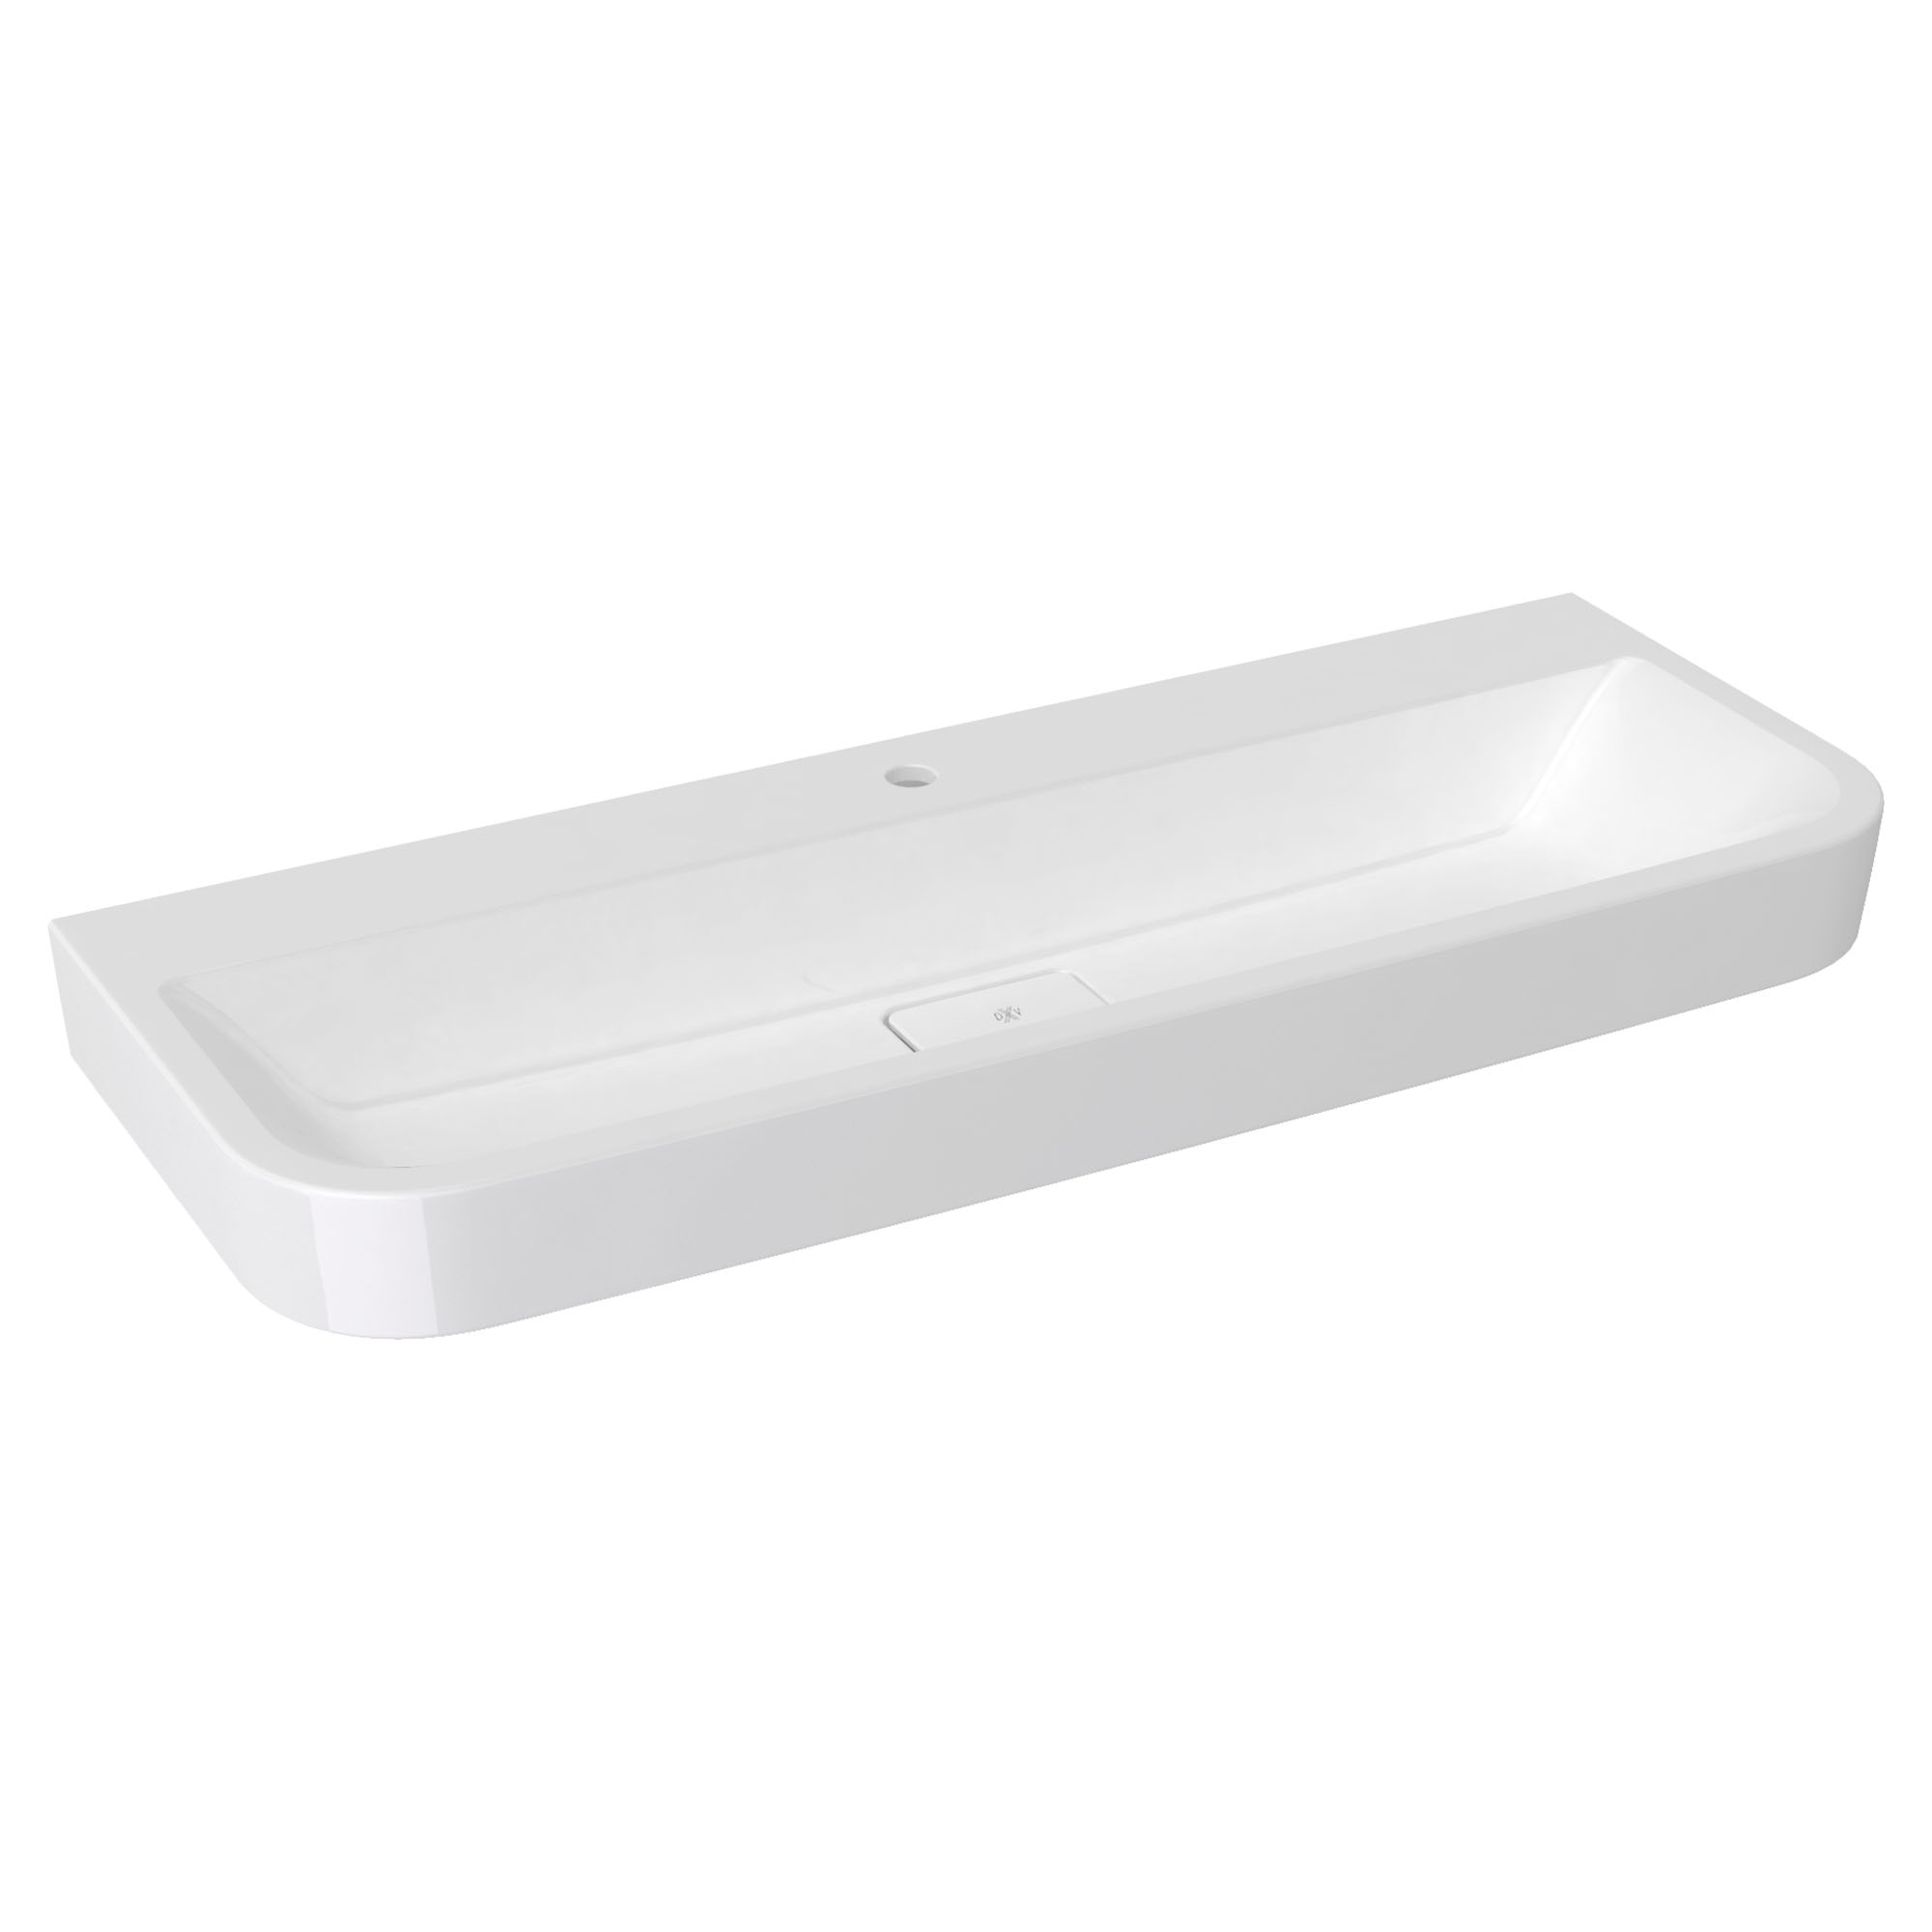 Equility® Wall-Hung Sink, 1-Hole